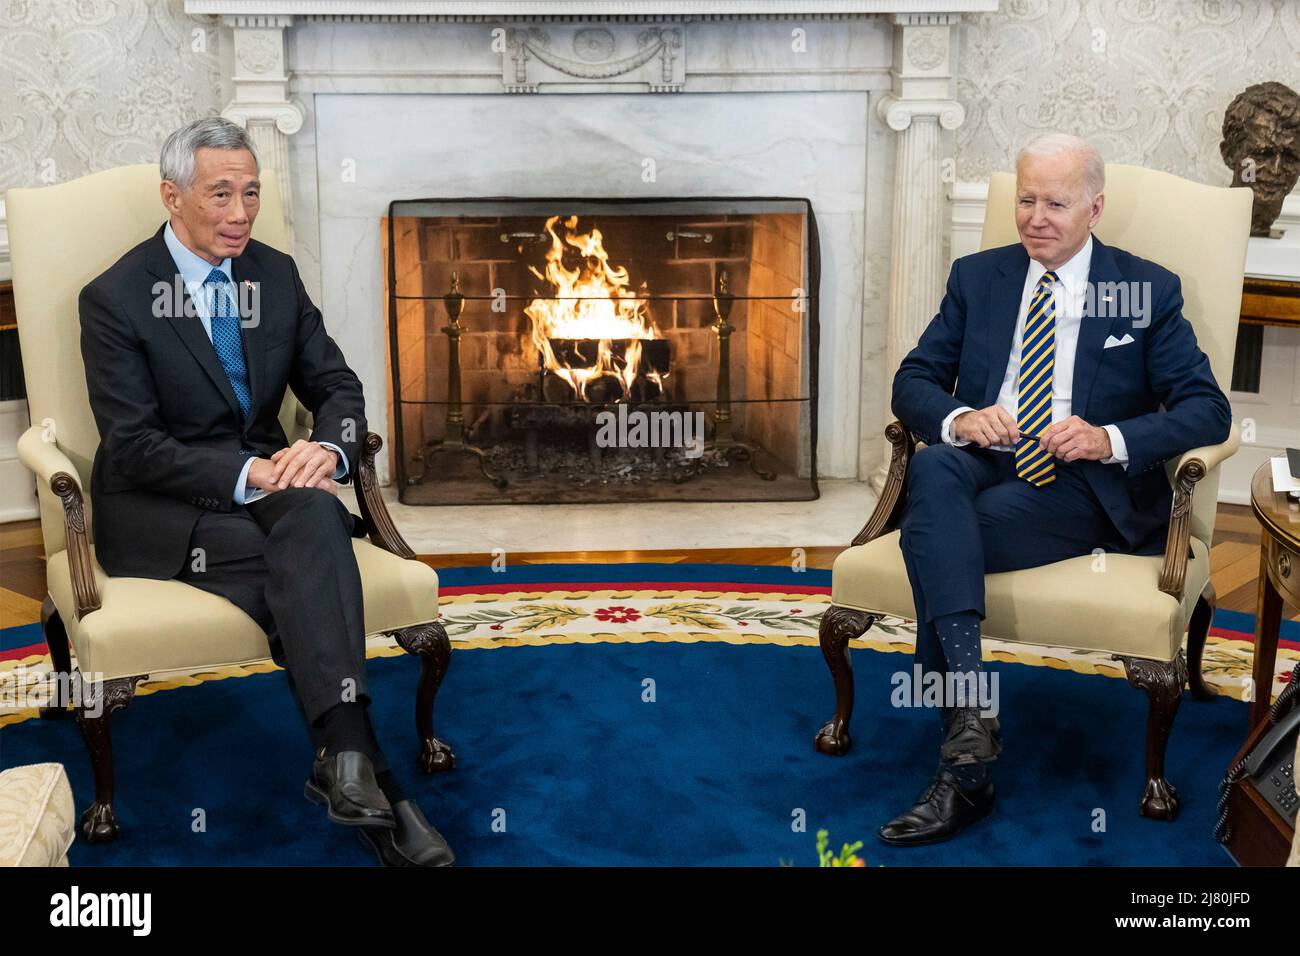 U.S President Joe Biden, holds a bilateral meeting with Singapore Prime Minister Lee Hsien Loong, left, in the Oval Office of the White House, March 29, 2022 in Washington, D.C. Stock Photo